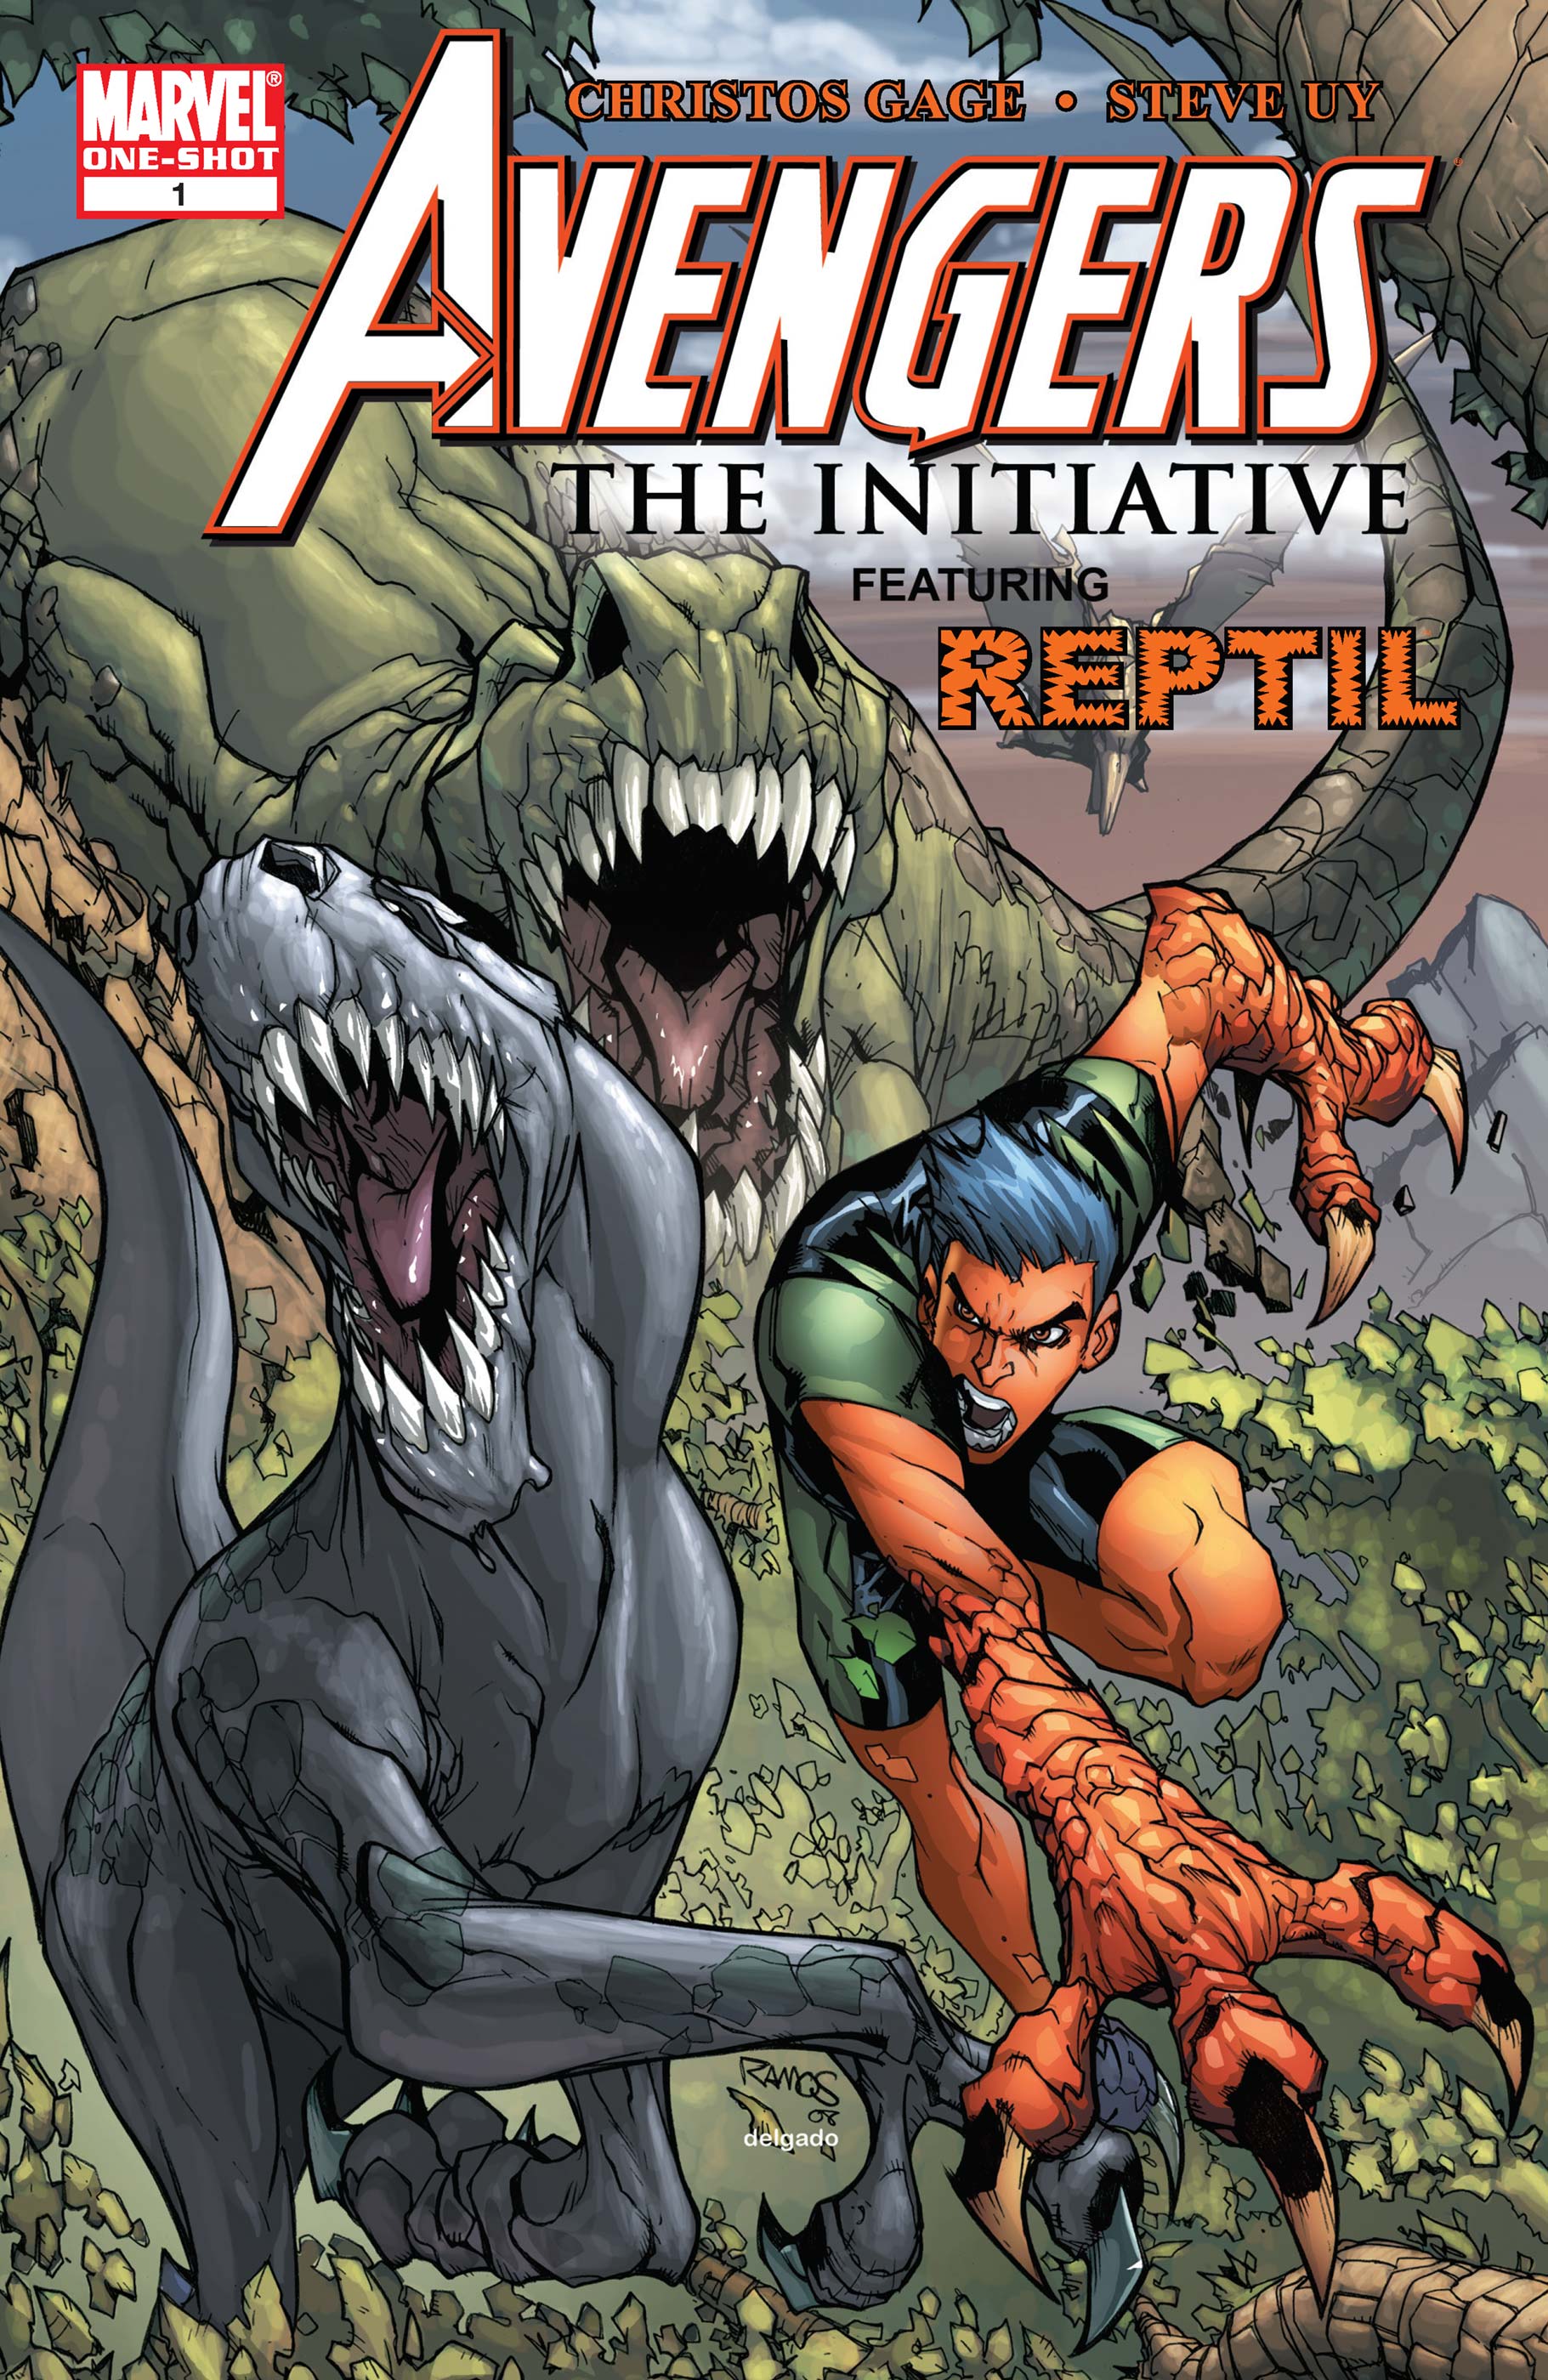 Avengers: The Initiative Featuring Reptil (2009) #1